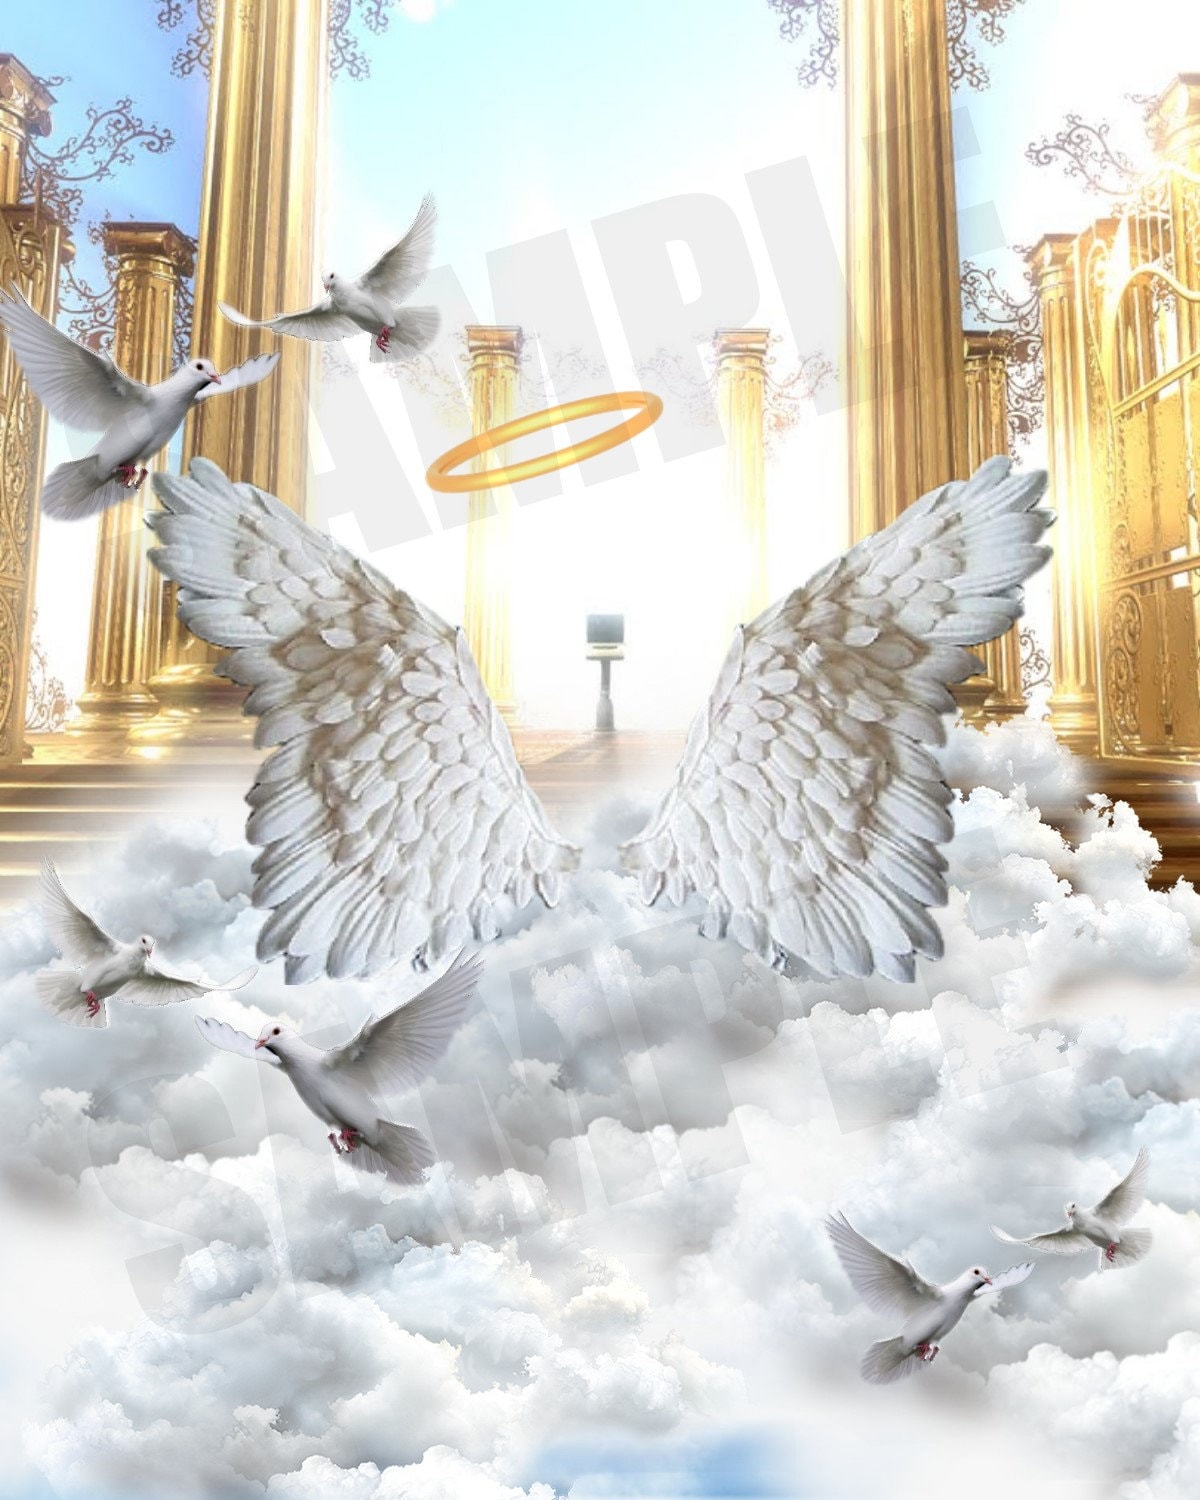 Gold Angels Wings White Clouds Memorial Background Heaven Backdrop